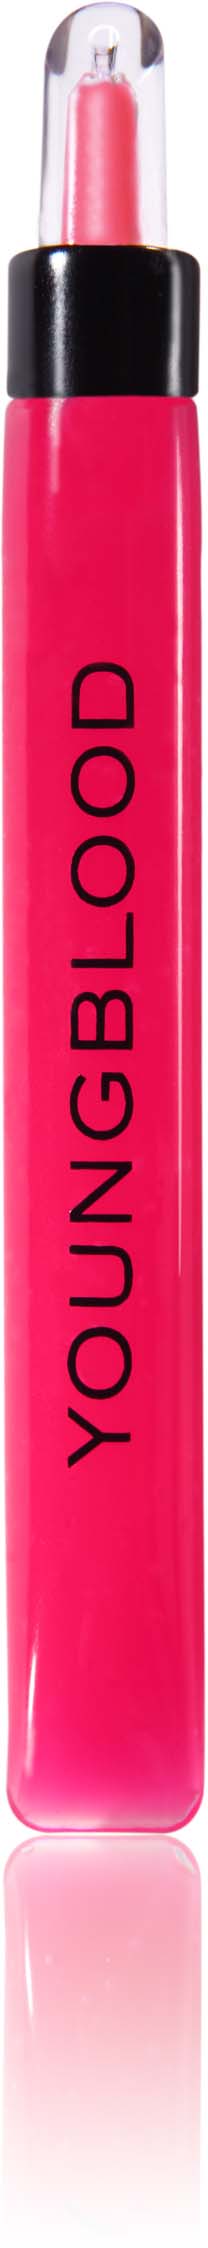 Youngblood Mighty Shiny Lip Gel 02 Confessed